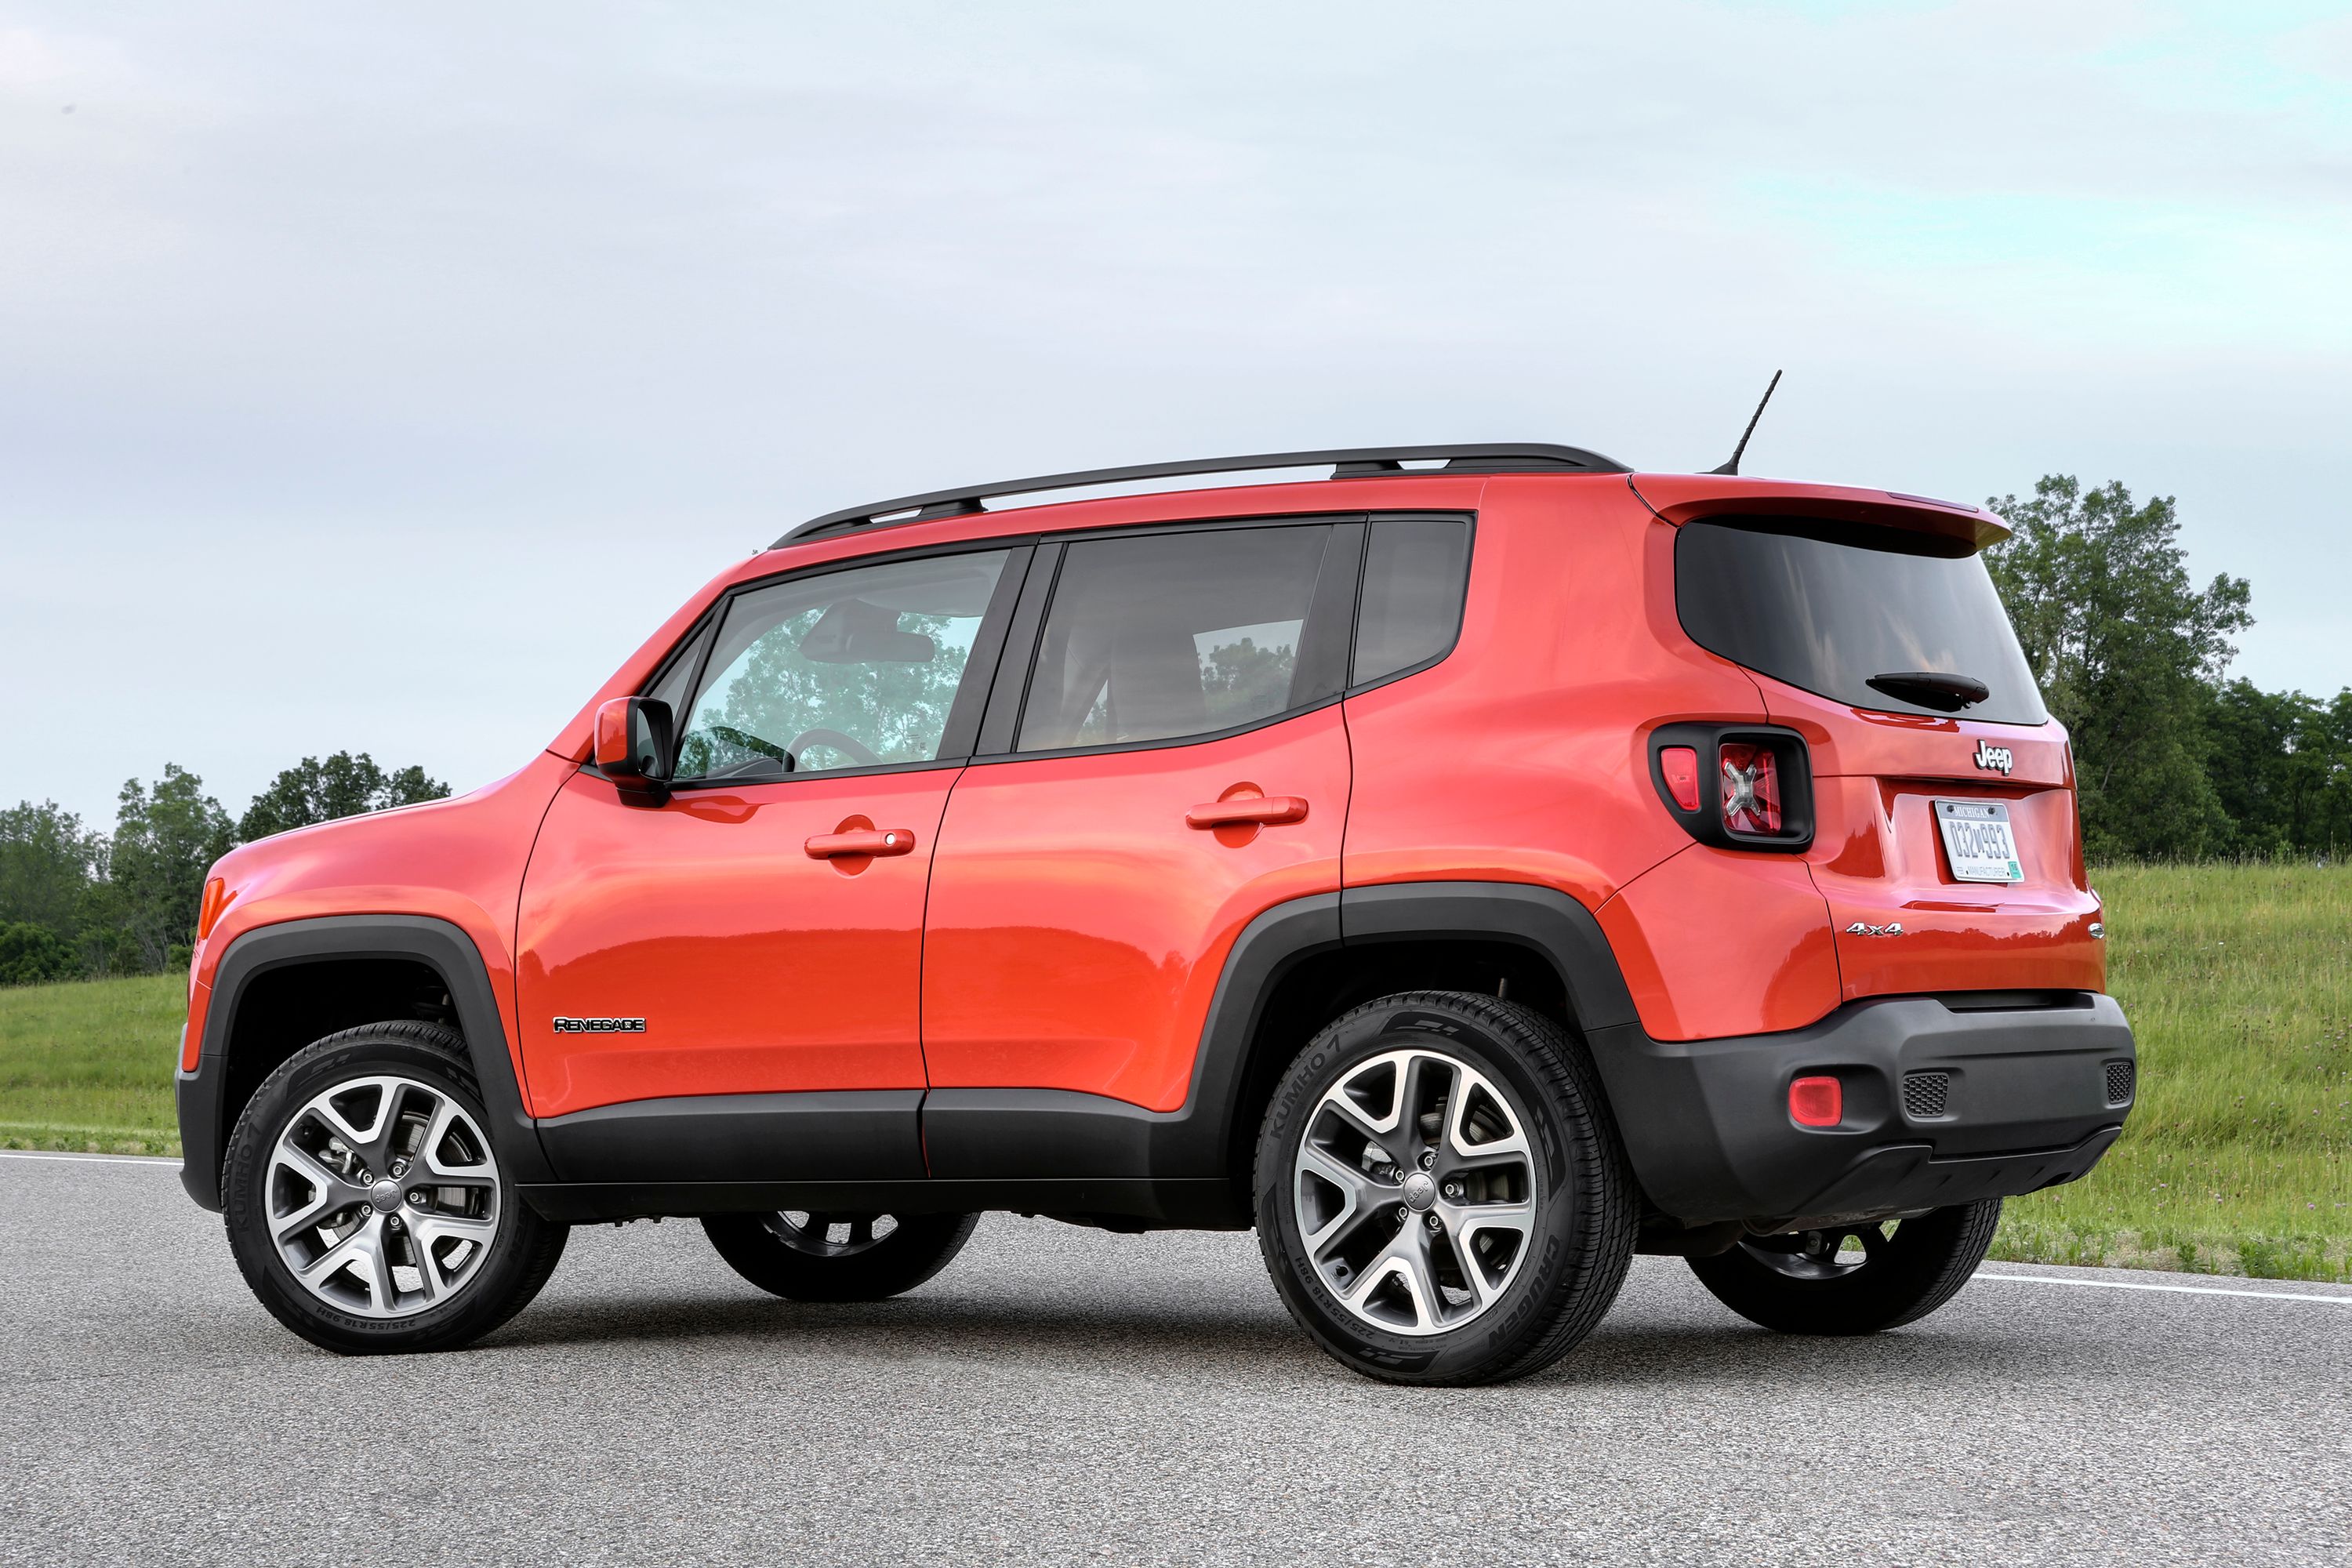 2016 Jeep Renegade Review